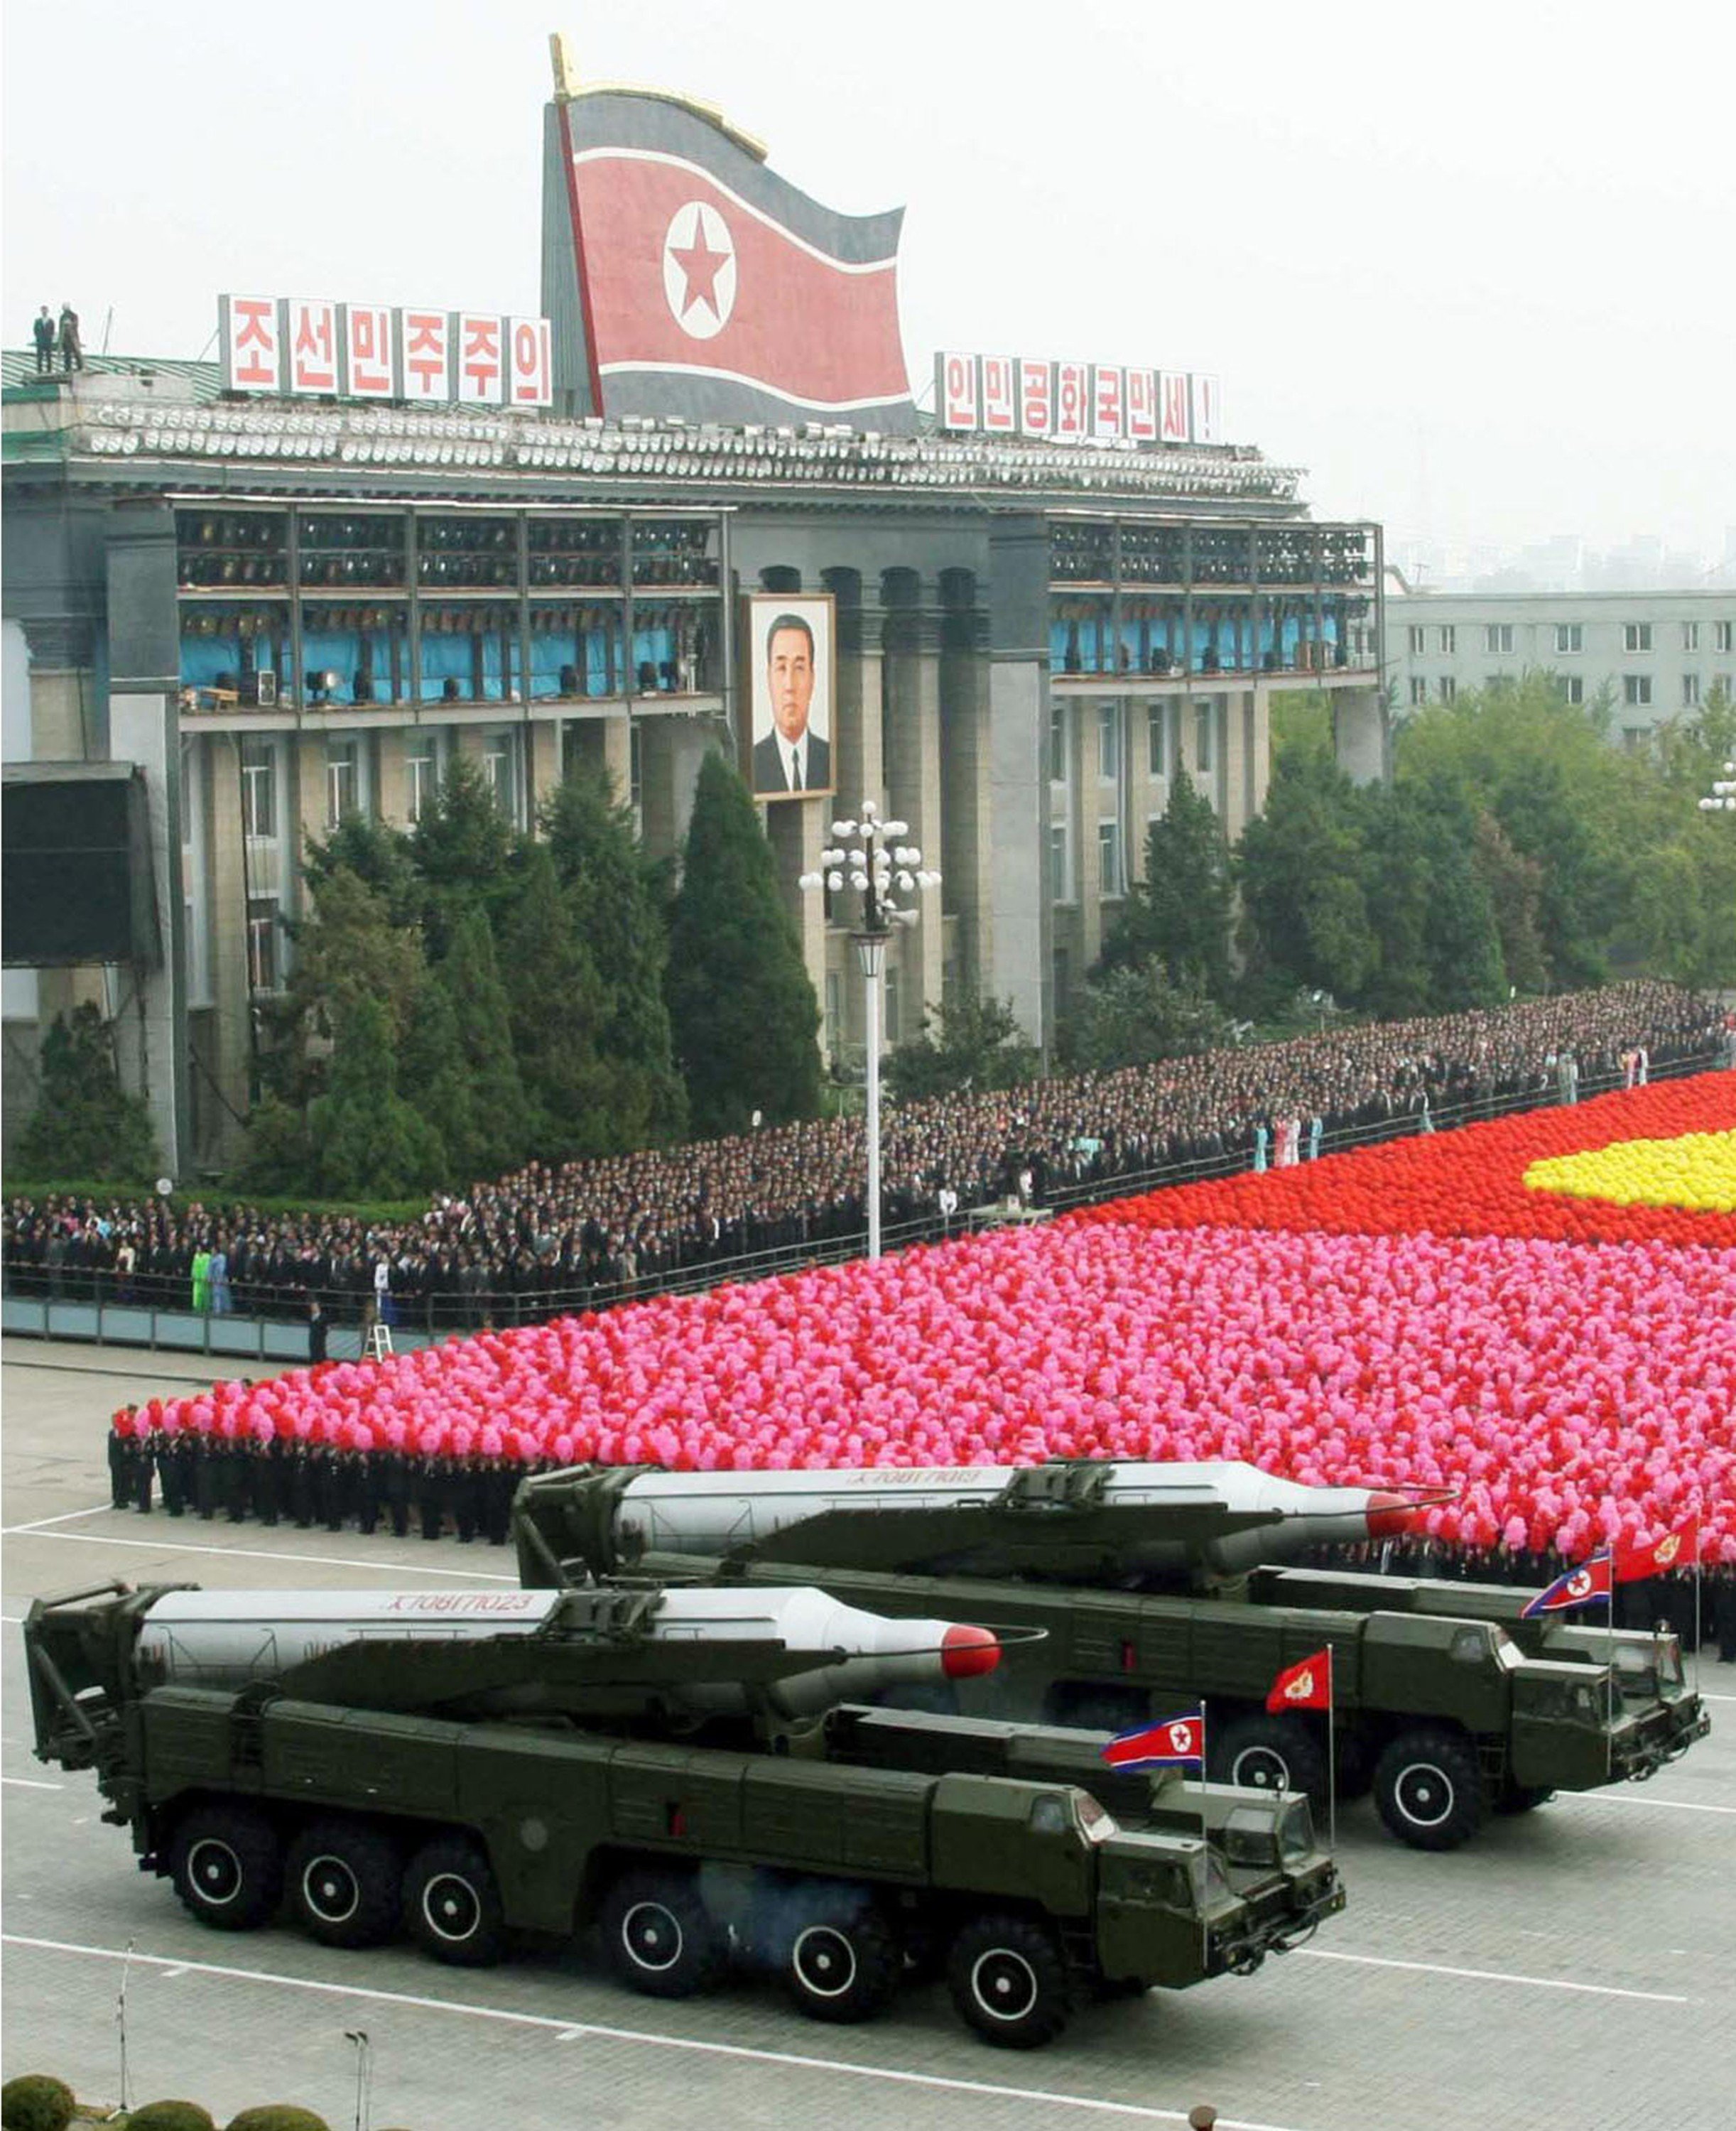 missile, North korea, Vehicle, Truck, Military, Parade, Wepons,  7 Wallpaper